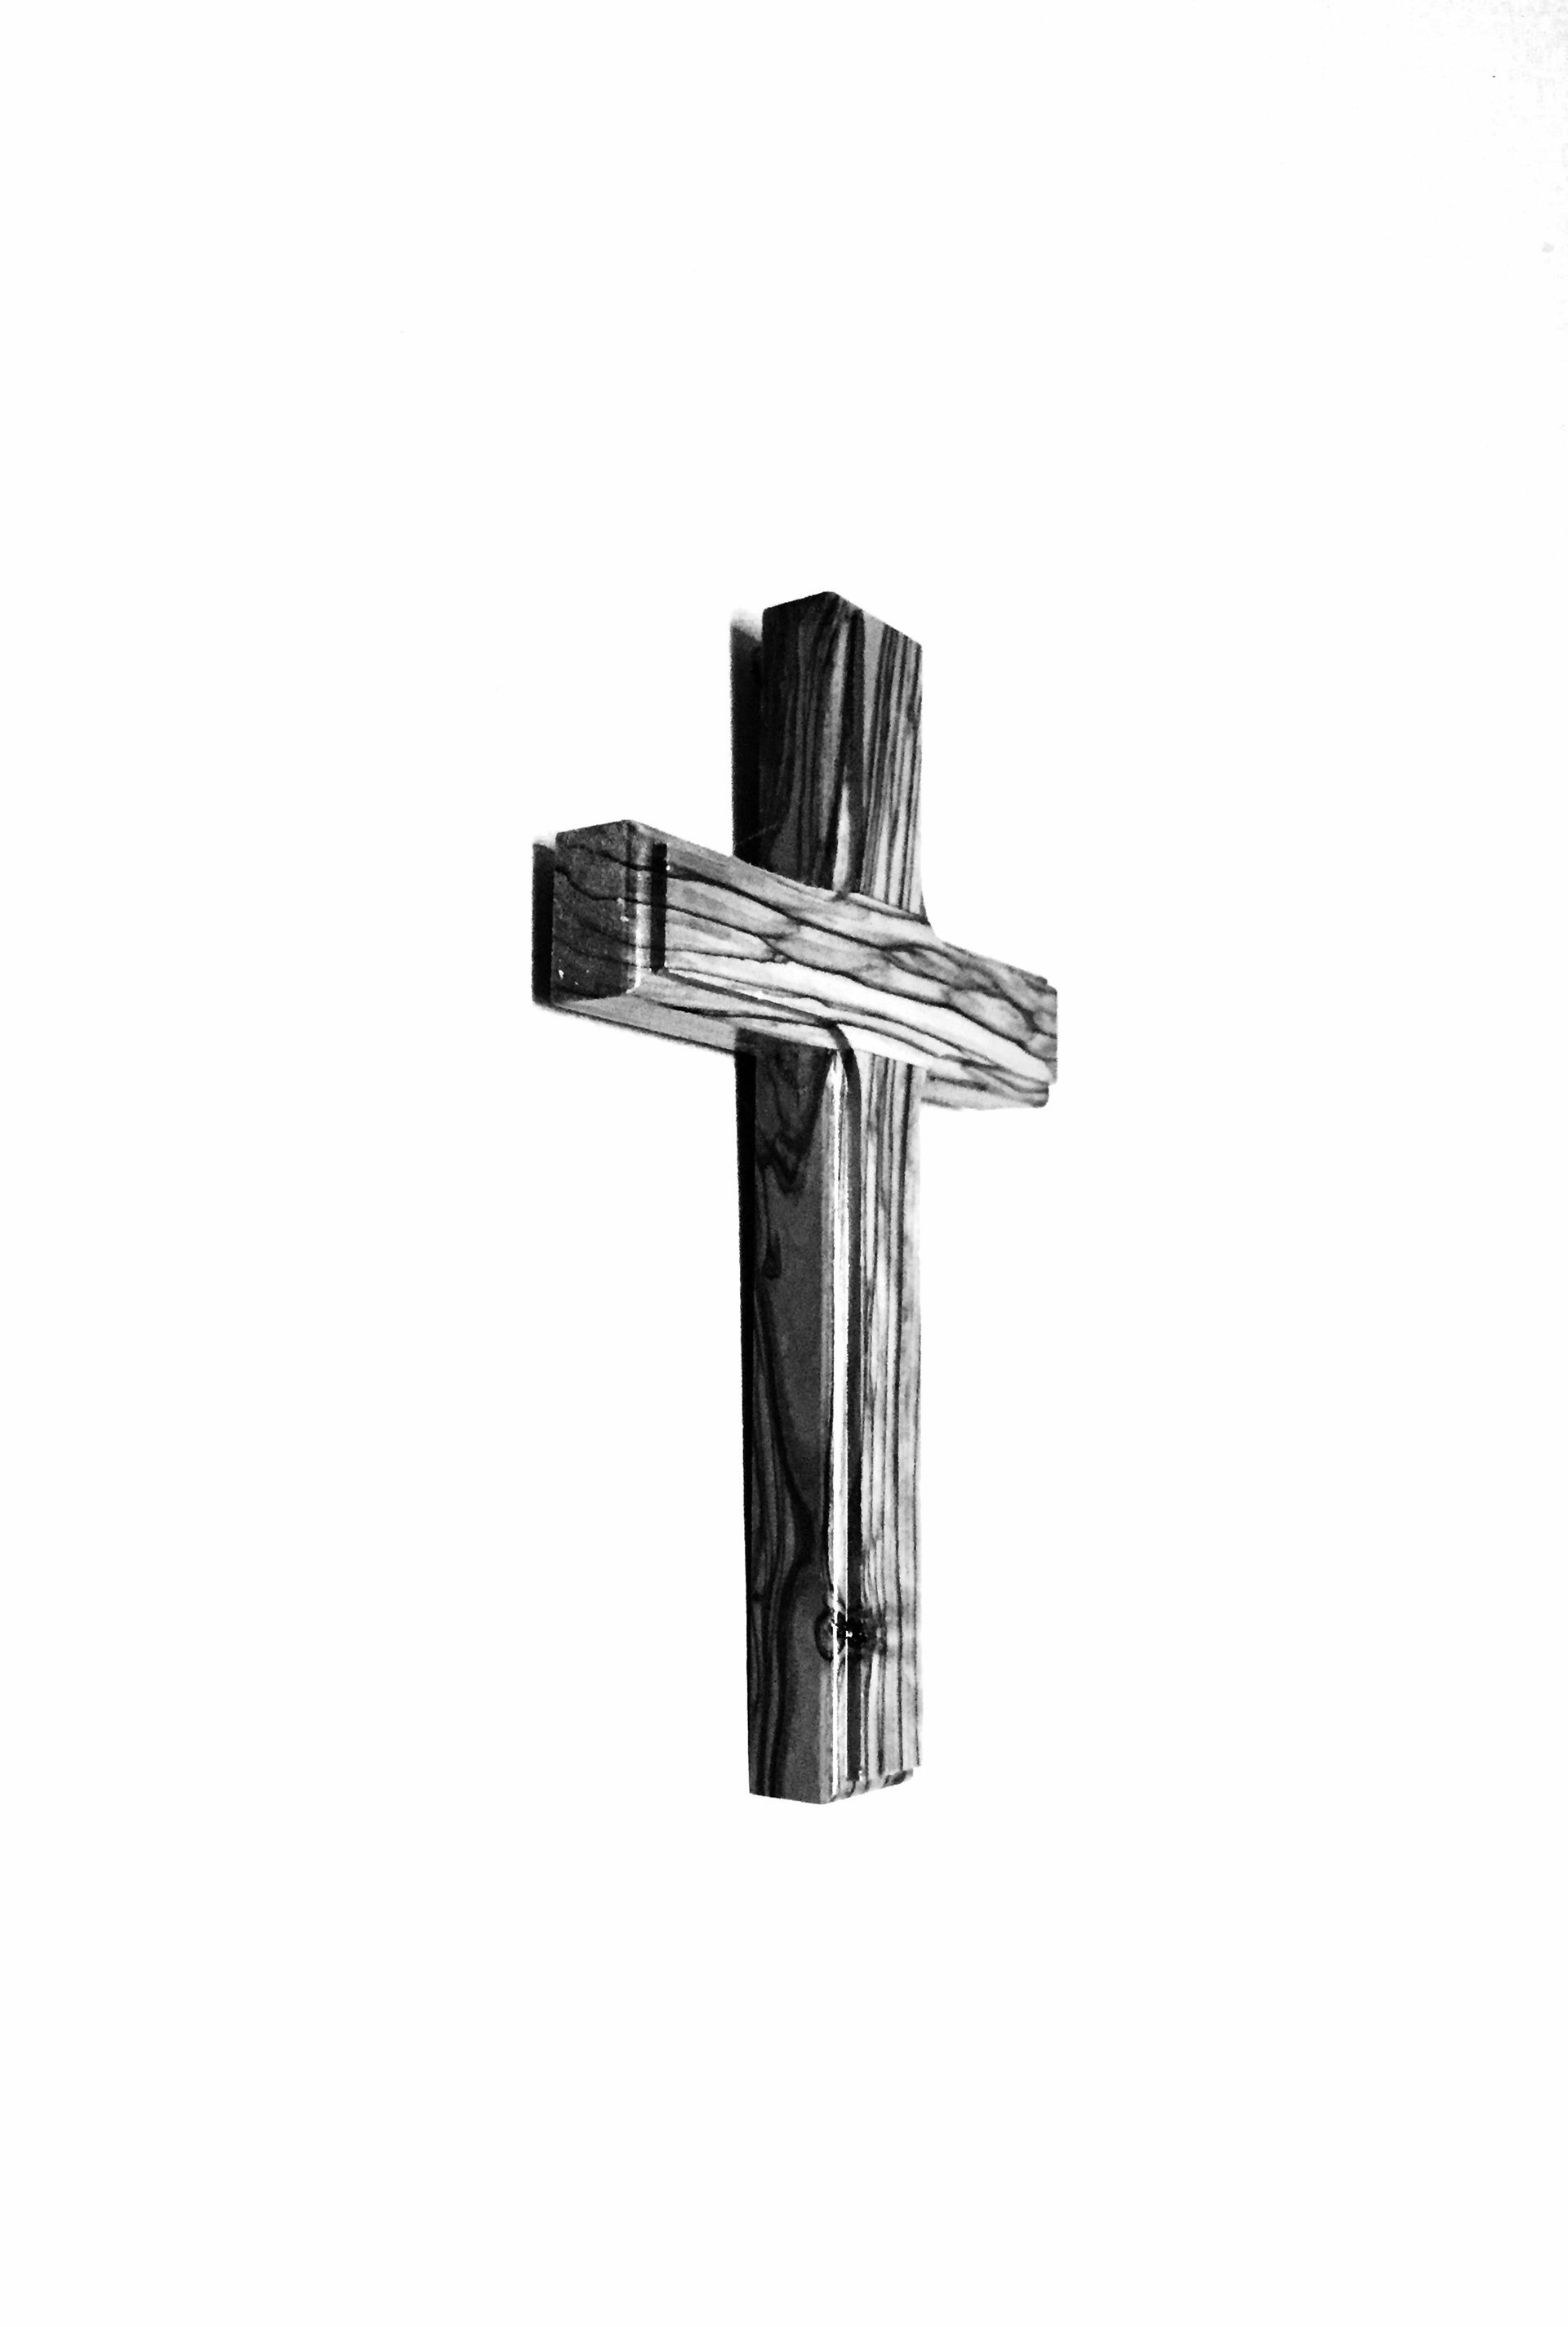 A black and white photo of a wooden cross on a white background.